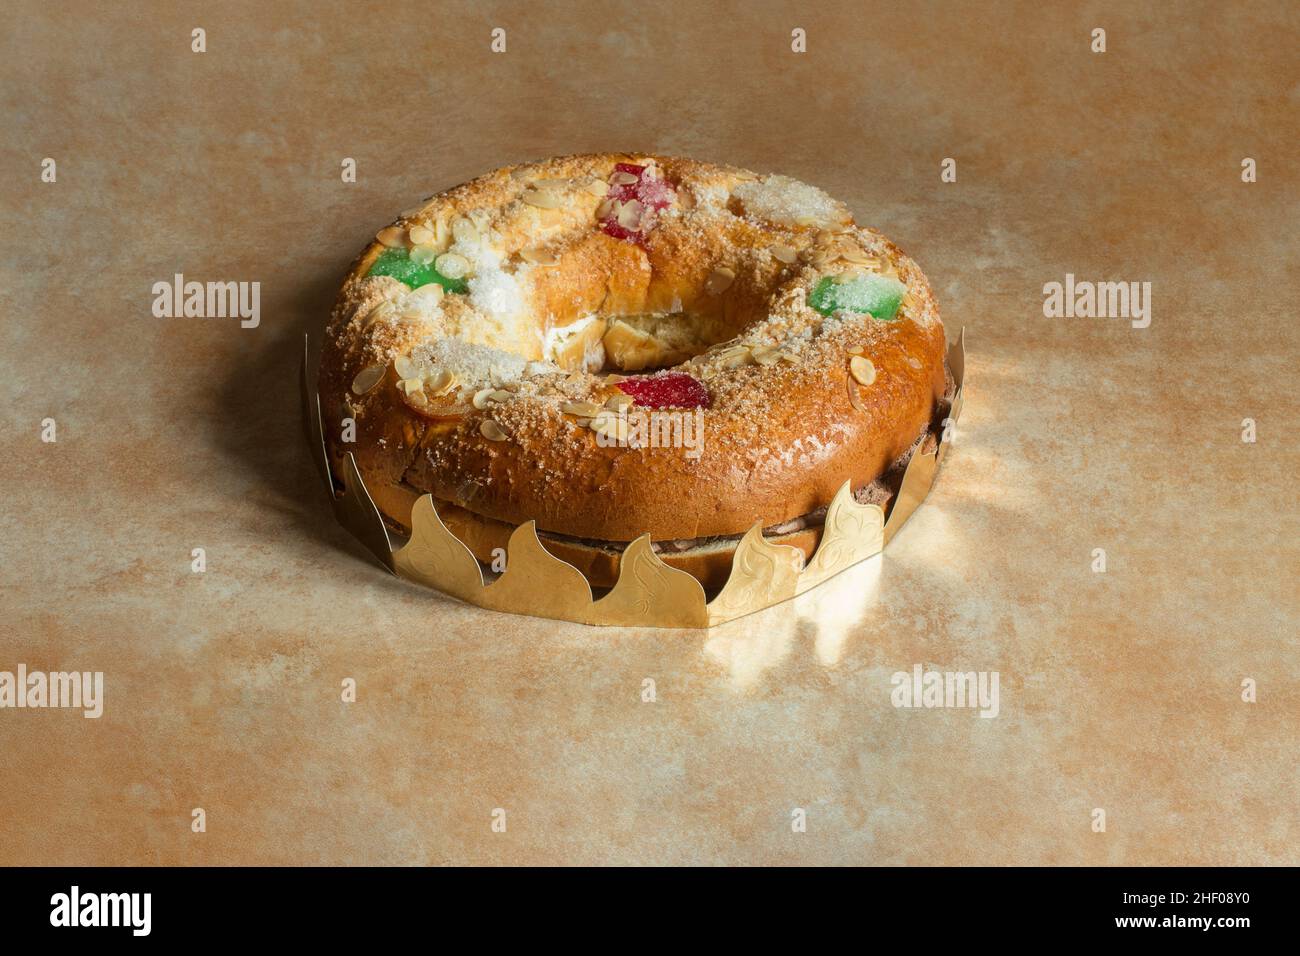 Large donut cake filled with sweet whipped cream and meringue with candied fruit, almonds, sugar, surrounded by a wreath on a textured abstract design Stock Photo